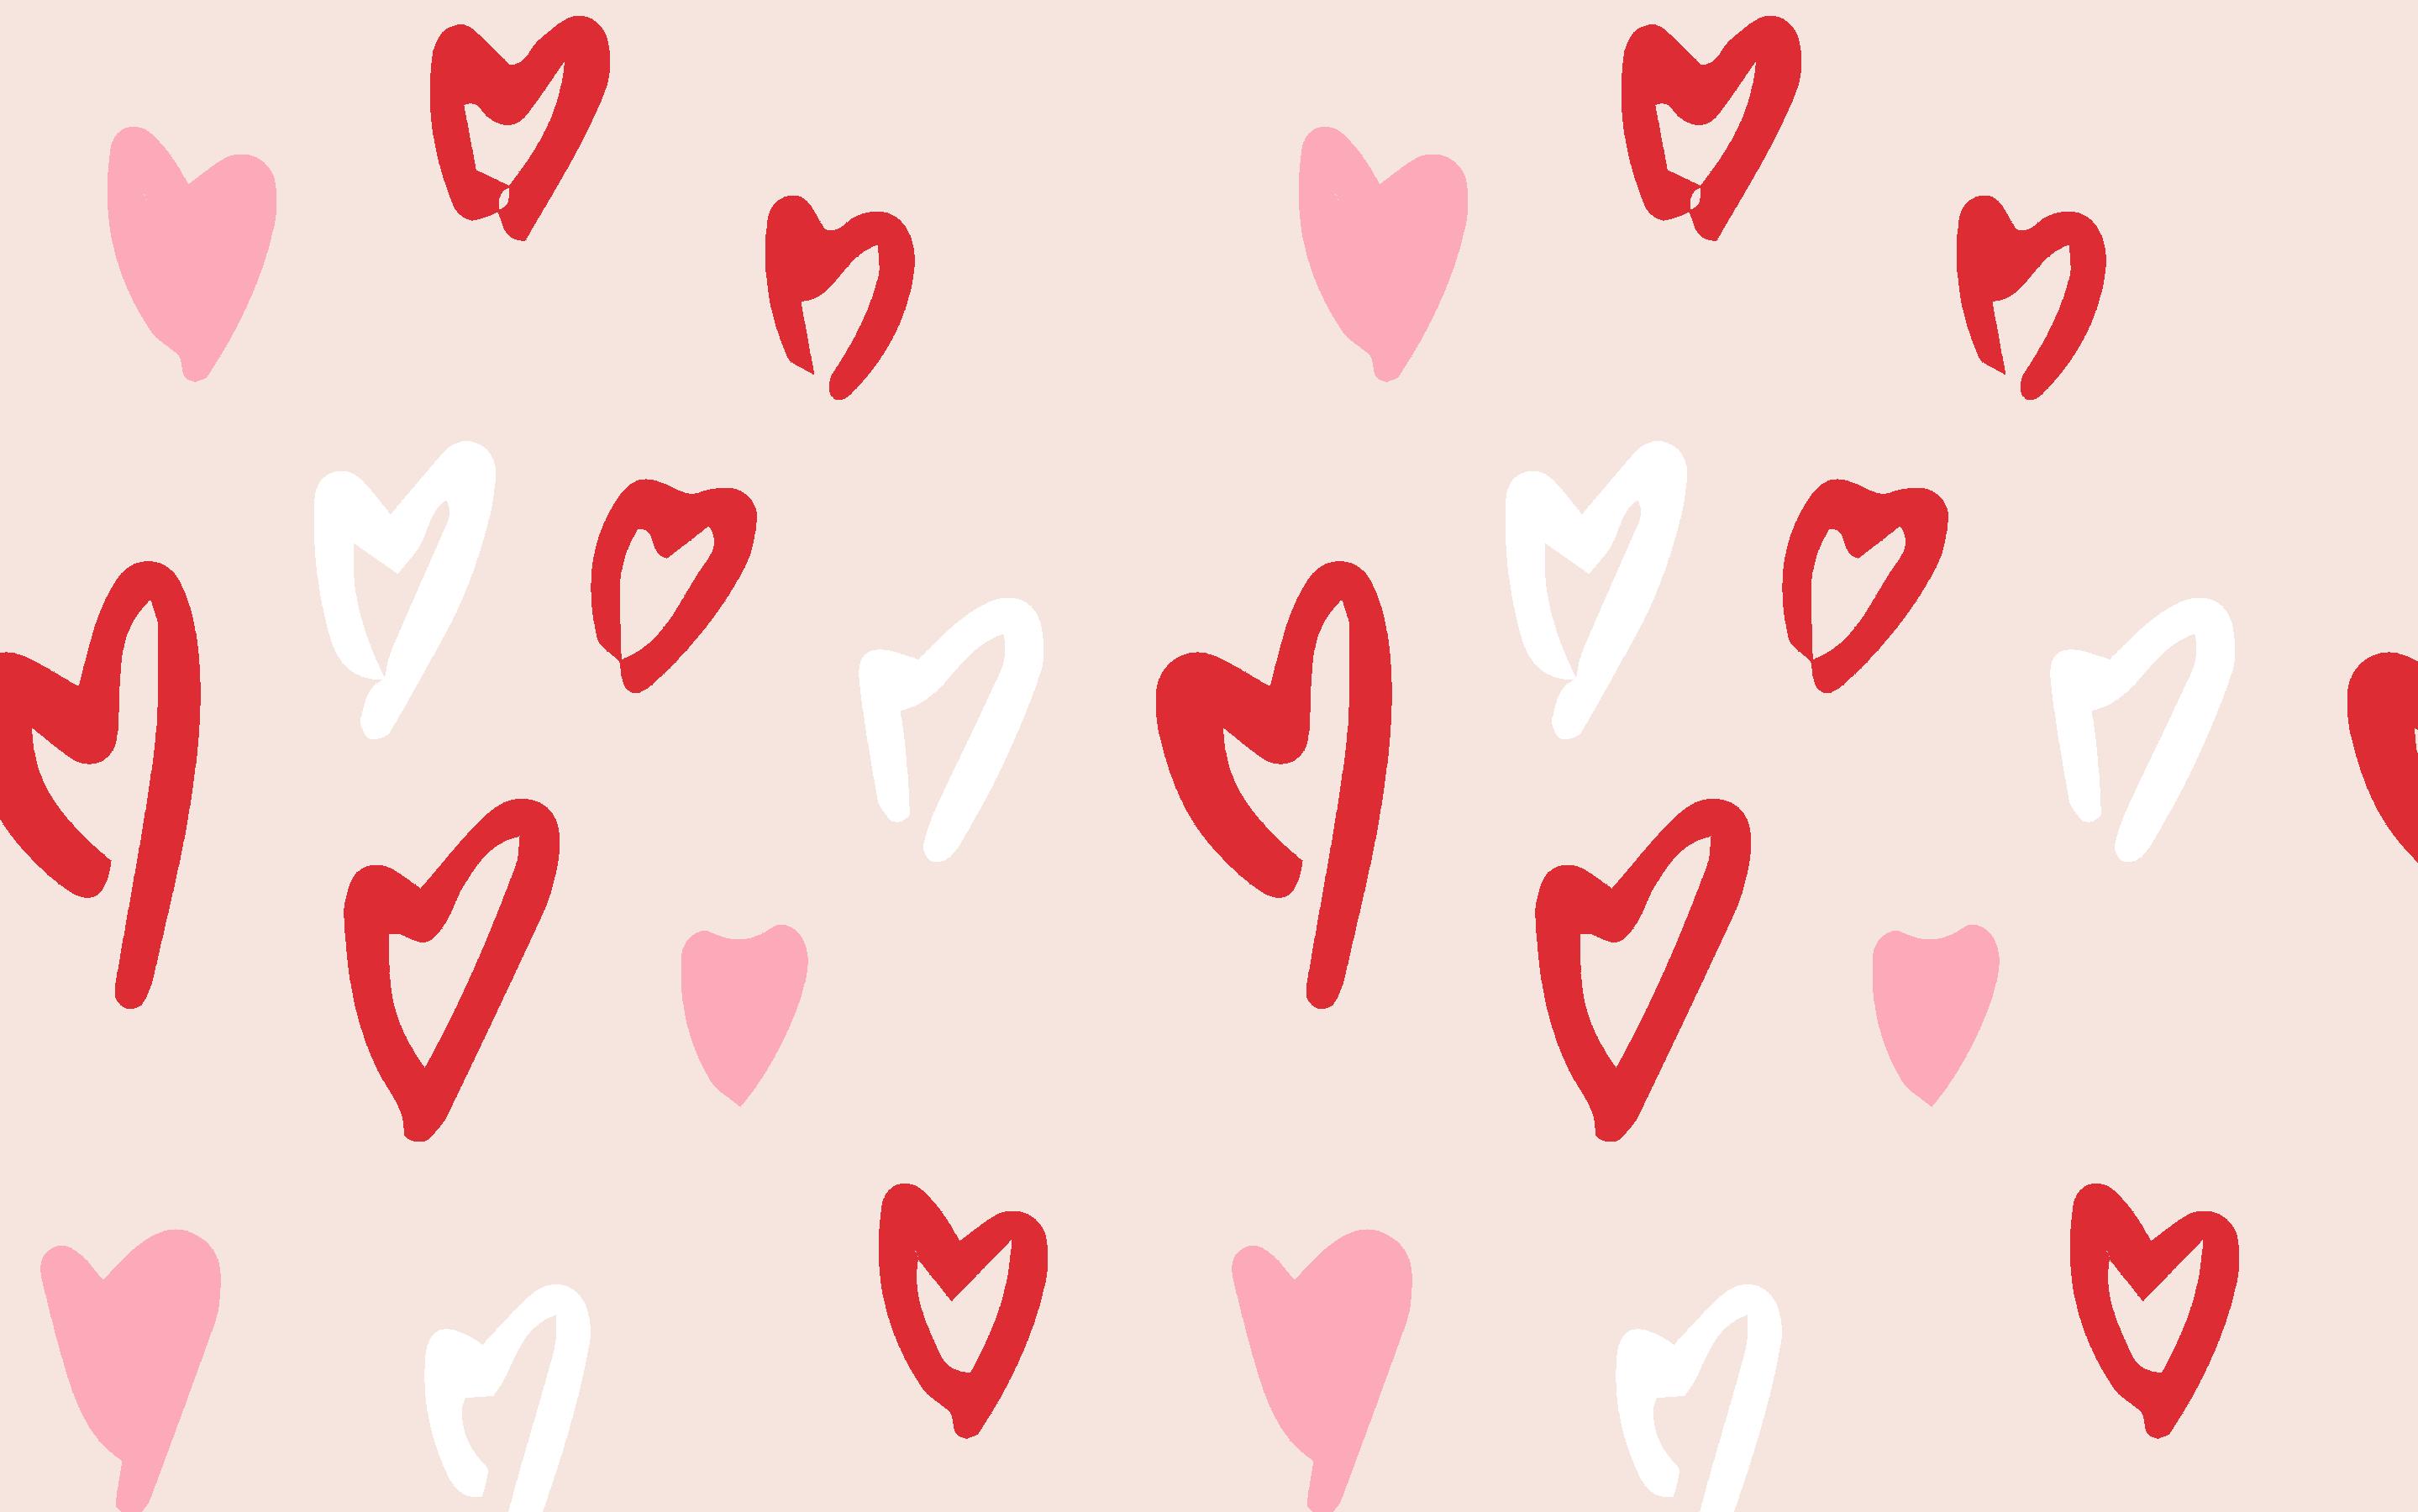 FREE VALENTINE'S DAY HEART WALLPAPERS FOR YOUR DESKTOP OR